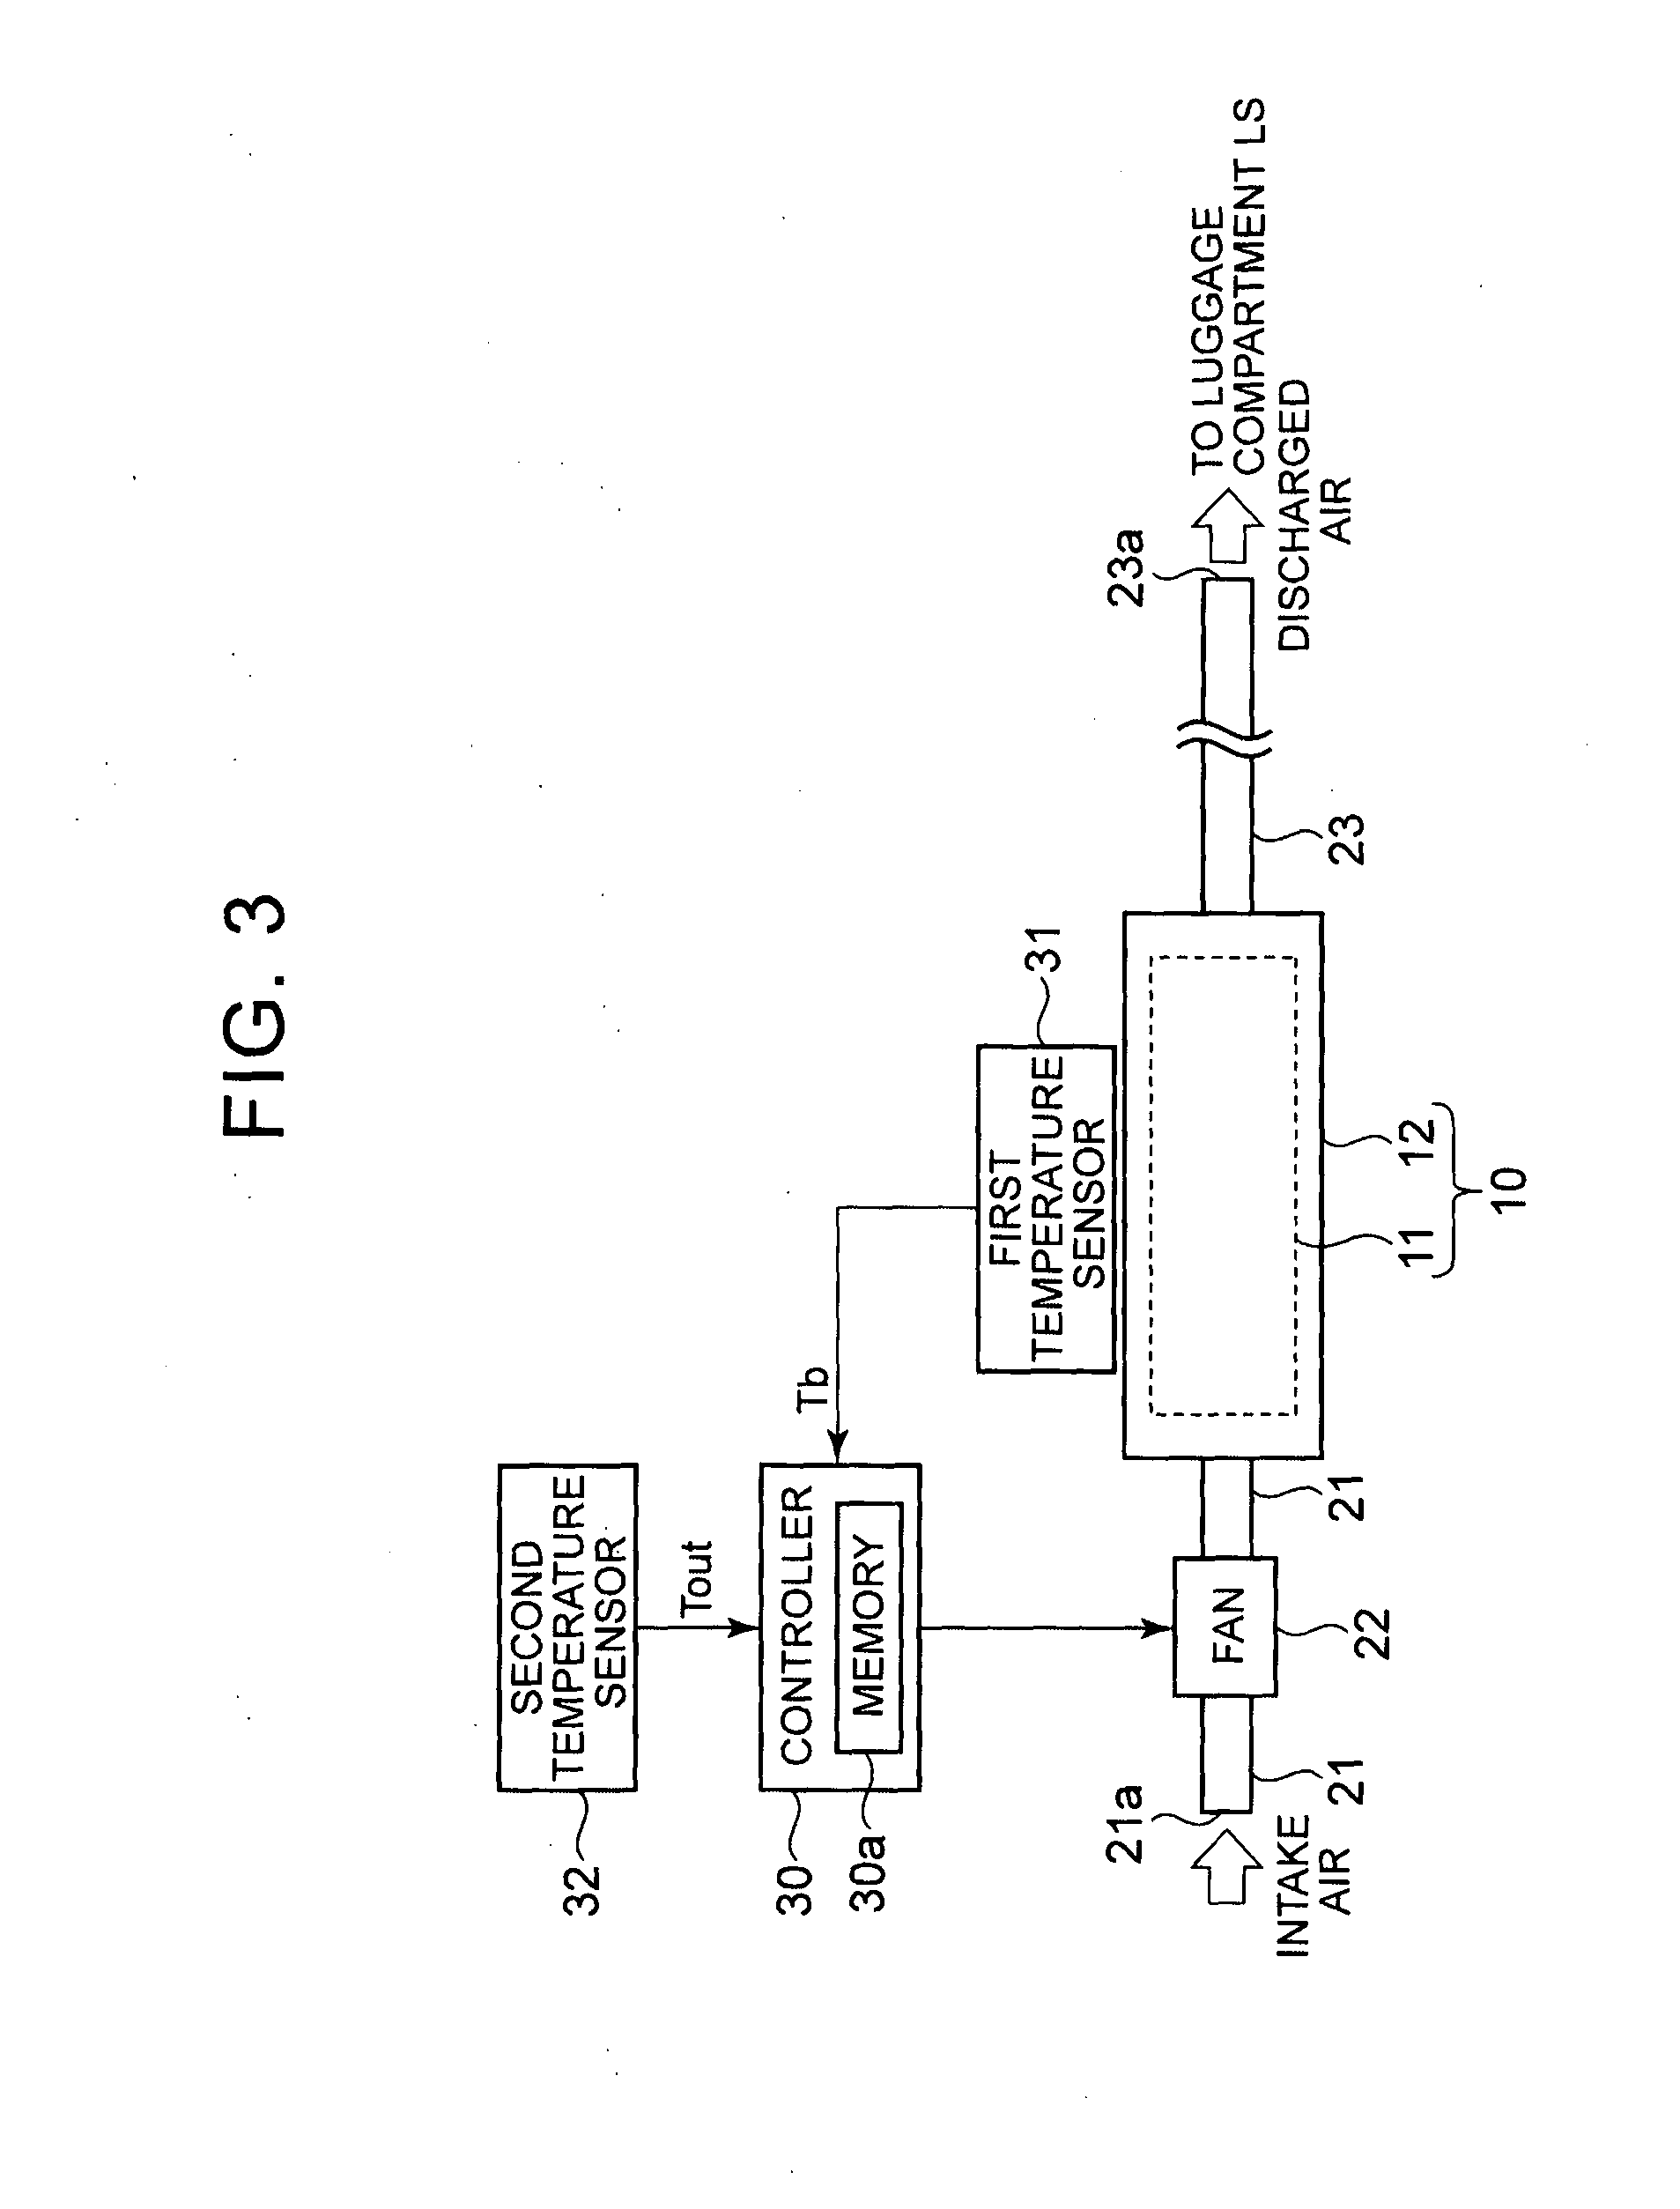 Vehicle comprising an electrical storage device cooled by a fan